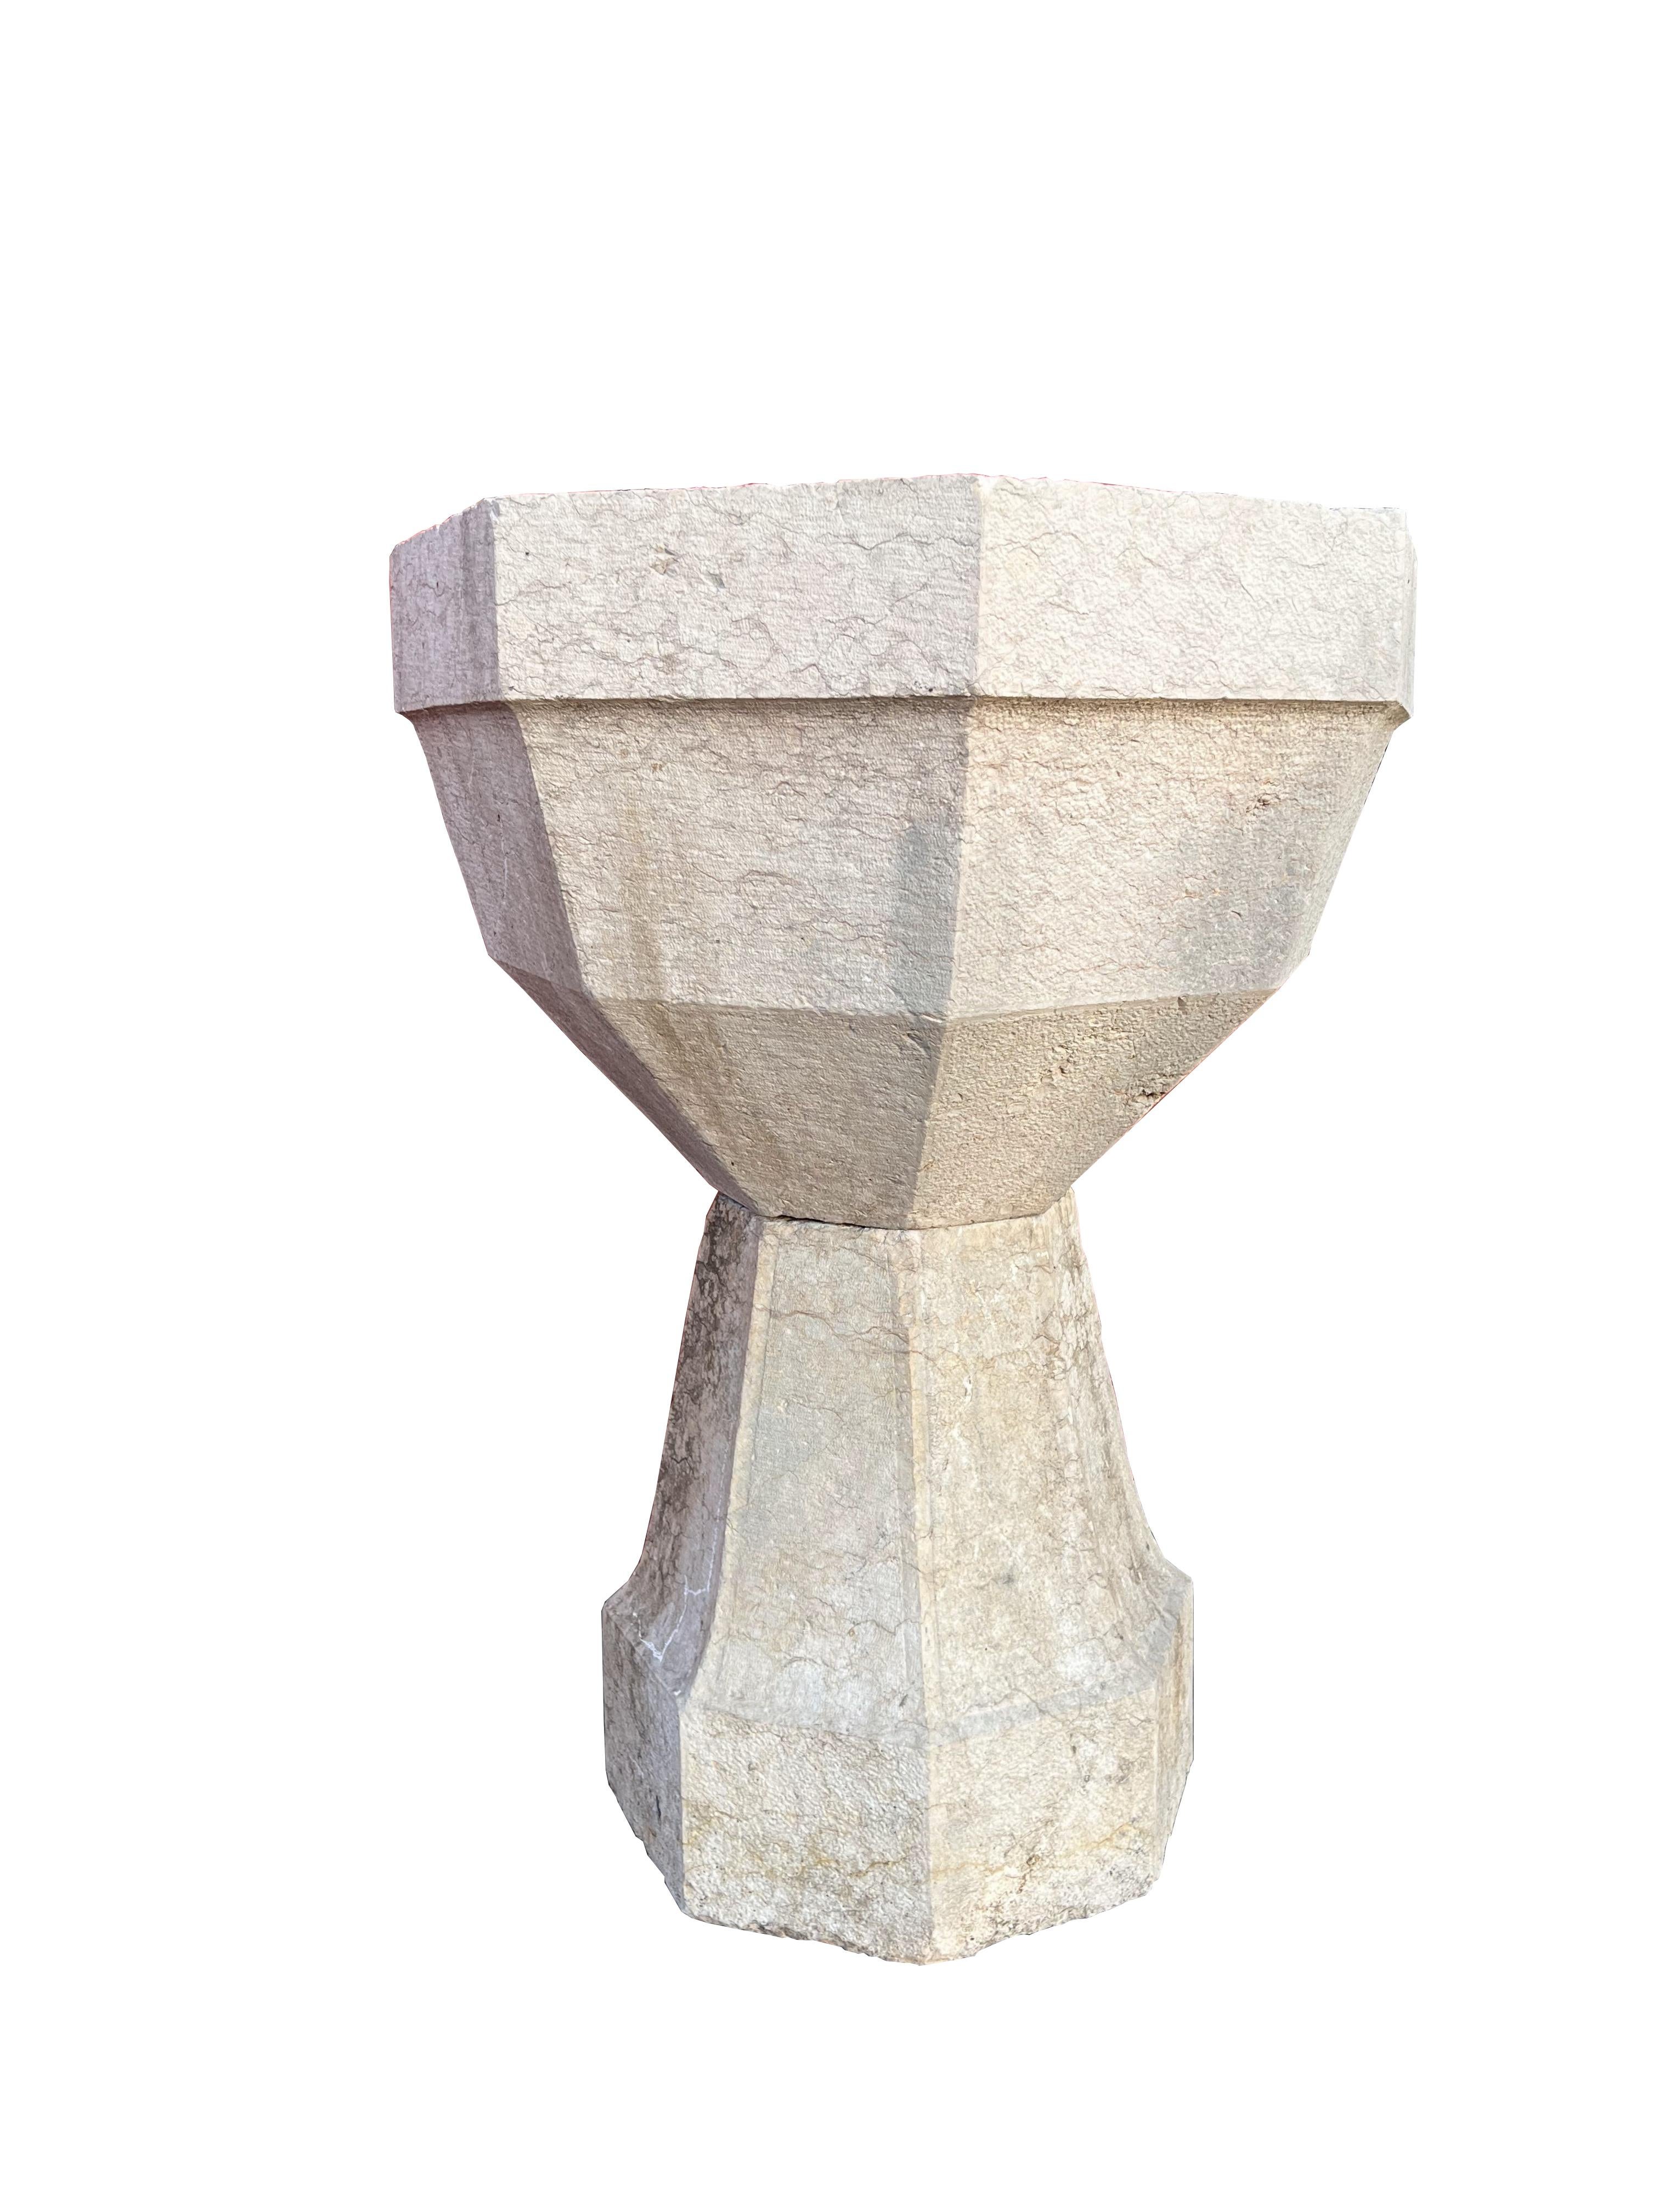 This piece is an Italian Antique Octagonal Marble Well imported directly from Veneto, Italy that comes with a wonderful charm consistent with its age. It is both weather and sun resistant, and will add a wonderful piece of history into any space it